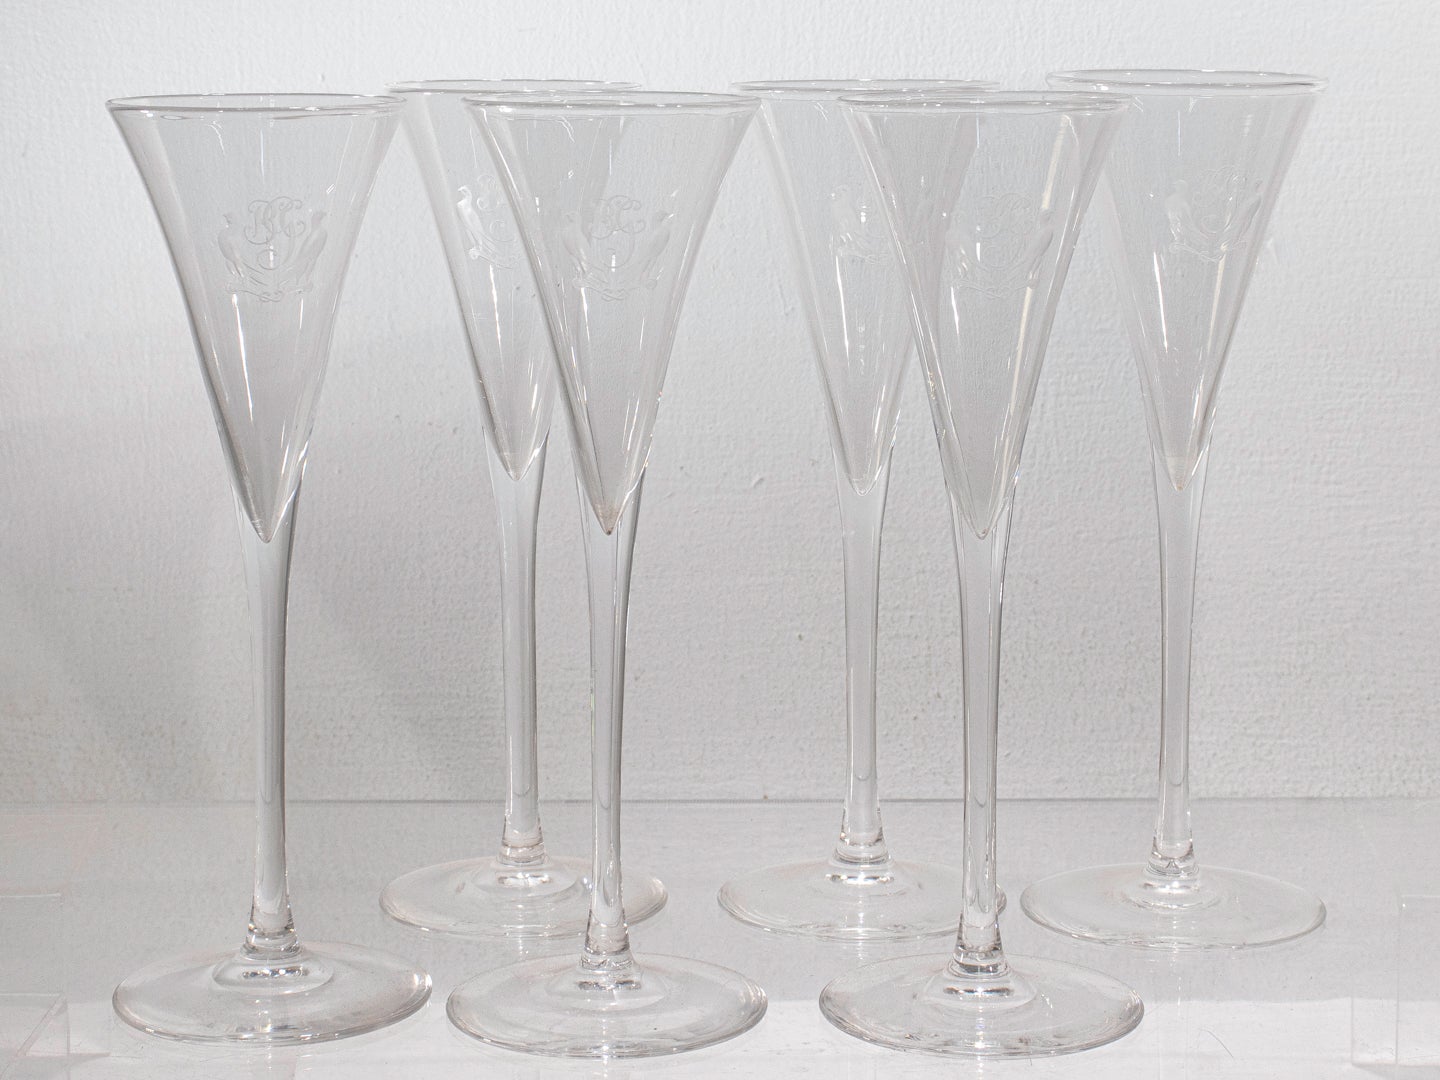 A fine set of 6 crystal glass champagne flutes or stems.

By Steuben.

With a pair of wheel-cut birds flanking a cursive monogram that reads 